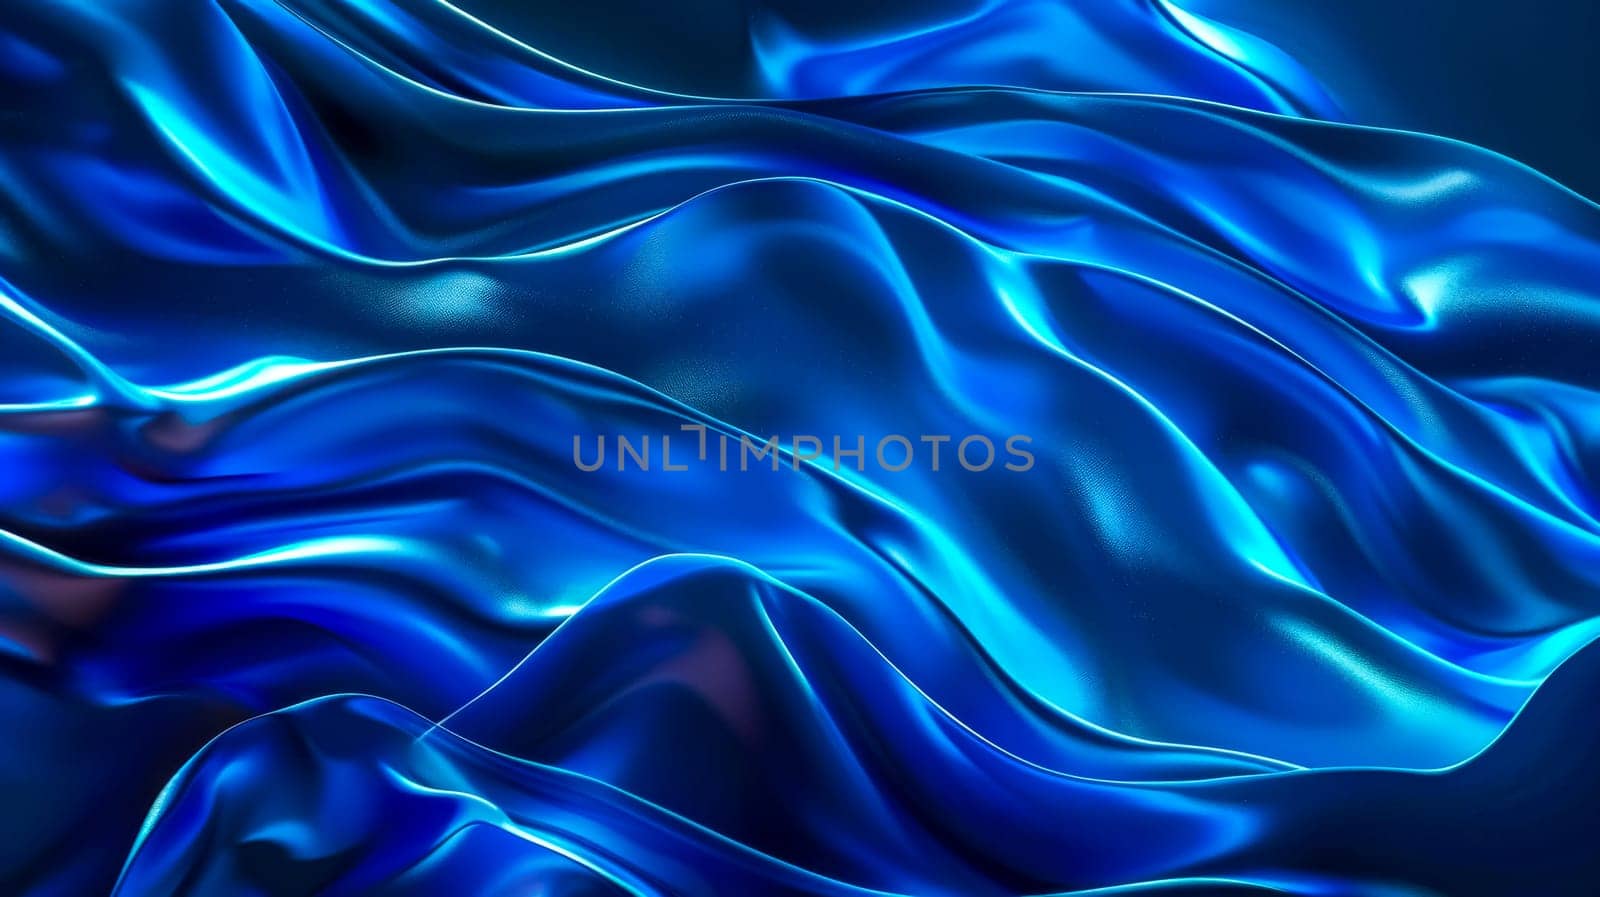 Vibrant 3d rendering of smooth blue silk fabric with undulating waves